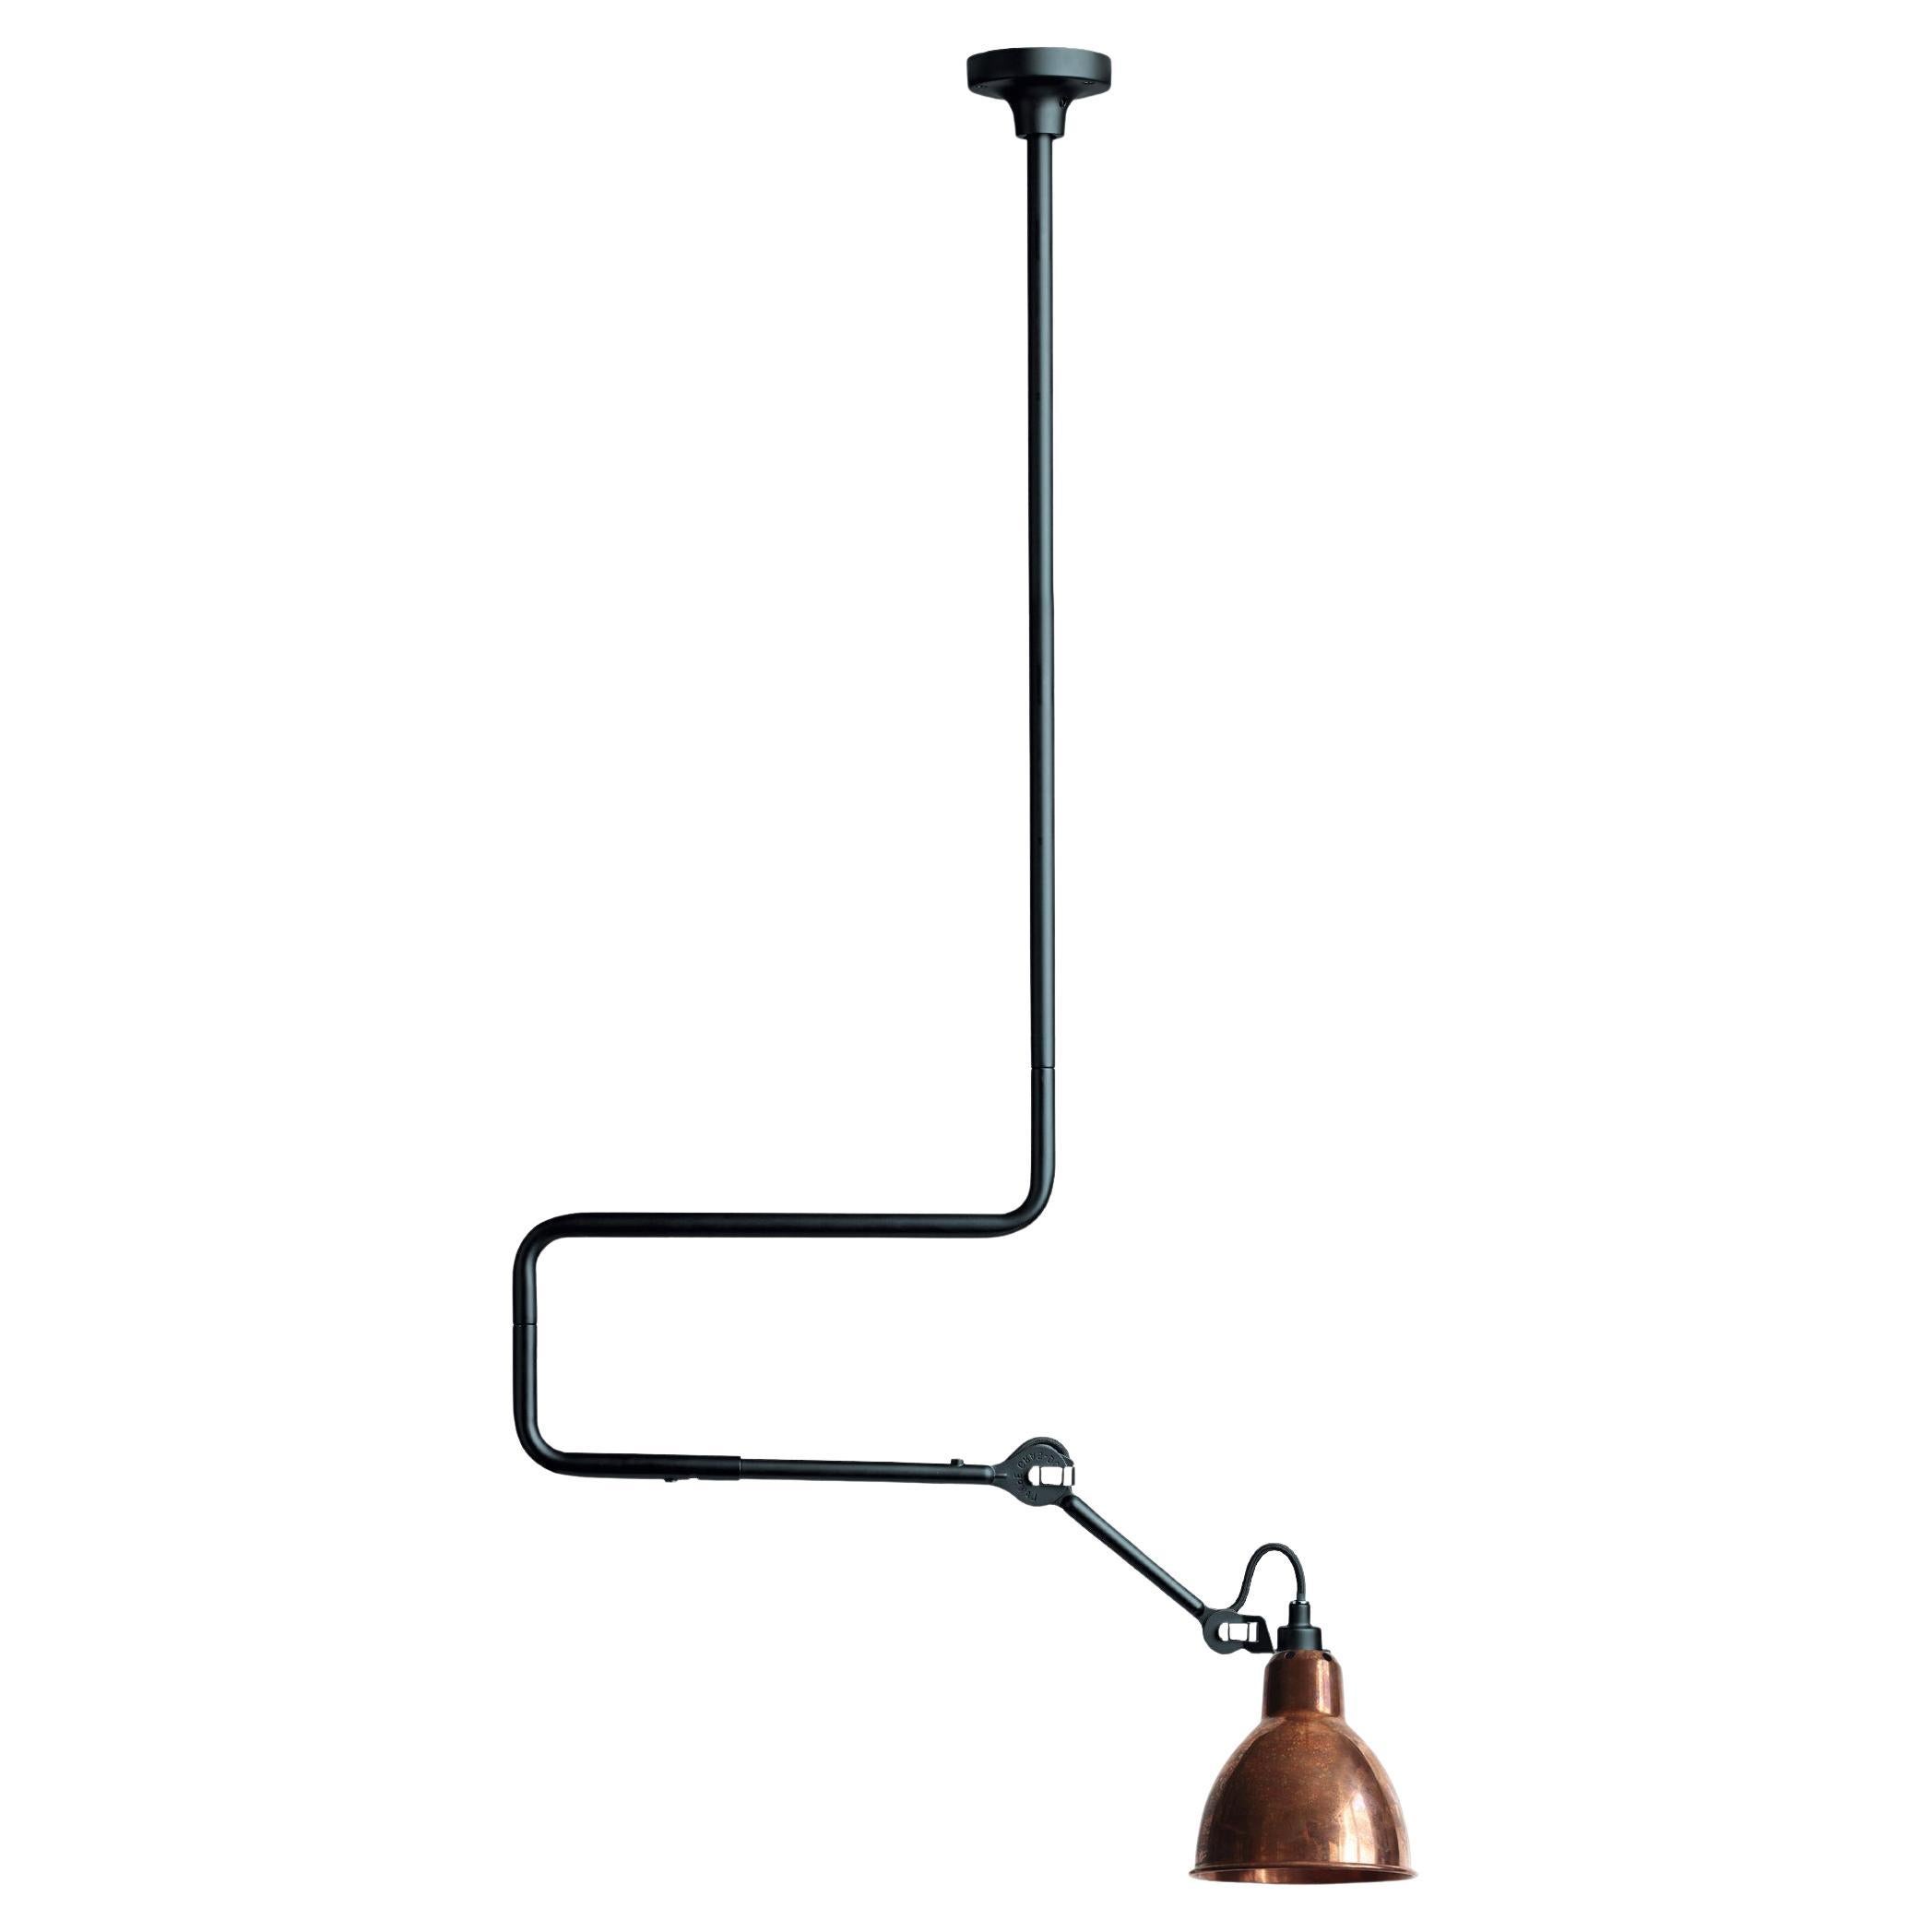 DCW Editions La Lampe Gras N°312 Pendant Lamp w/Extension in Raw Copper Shade